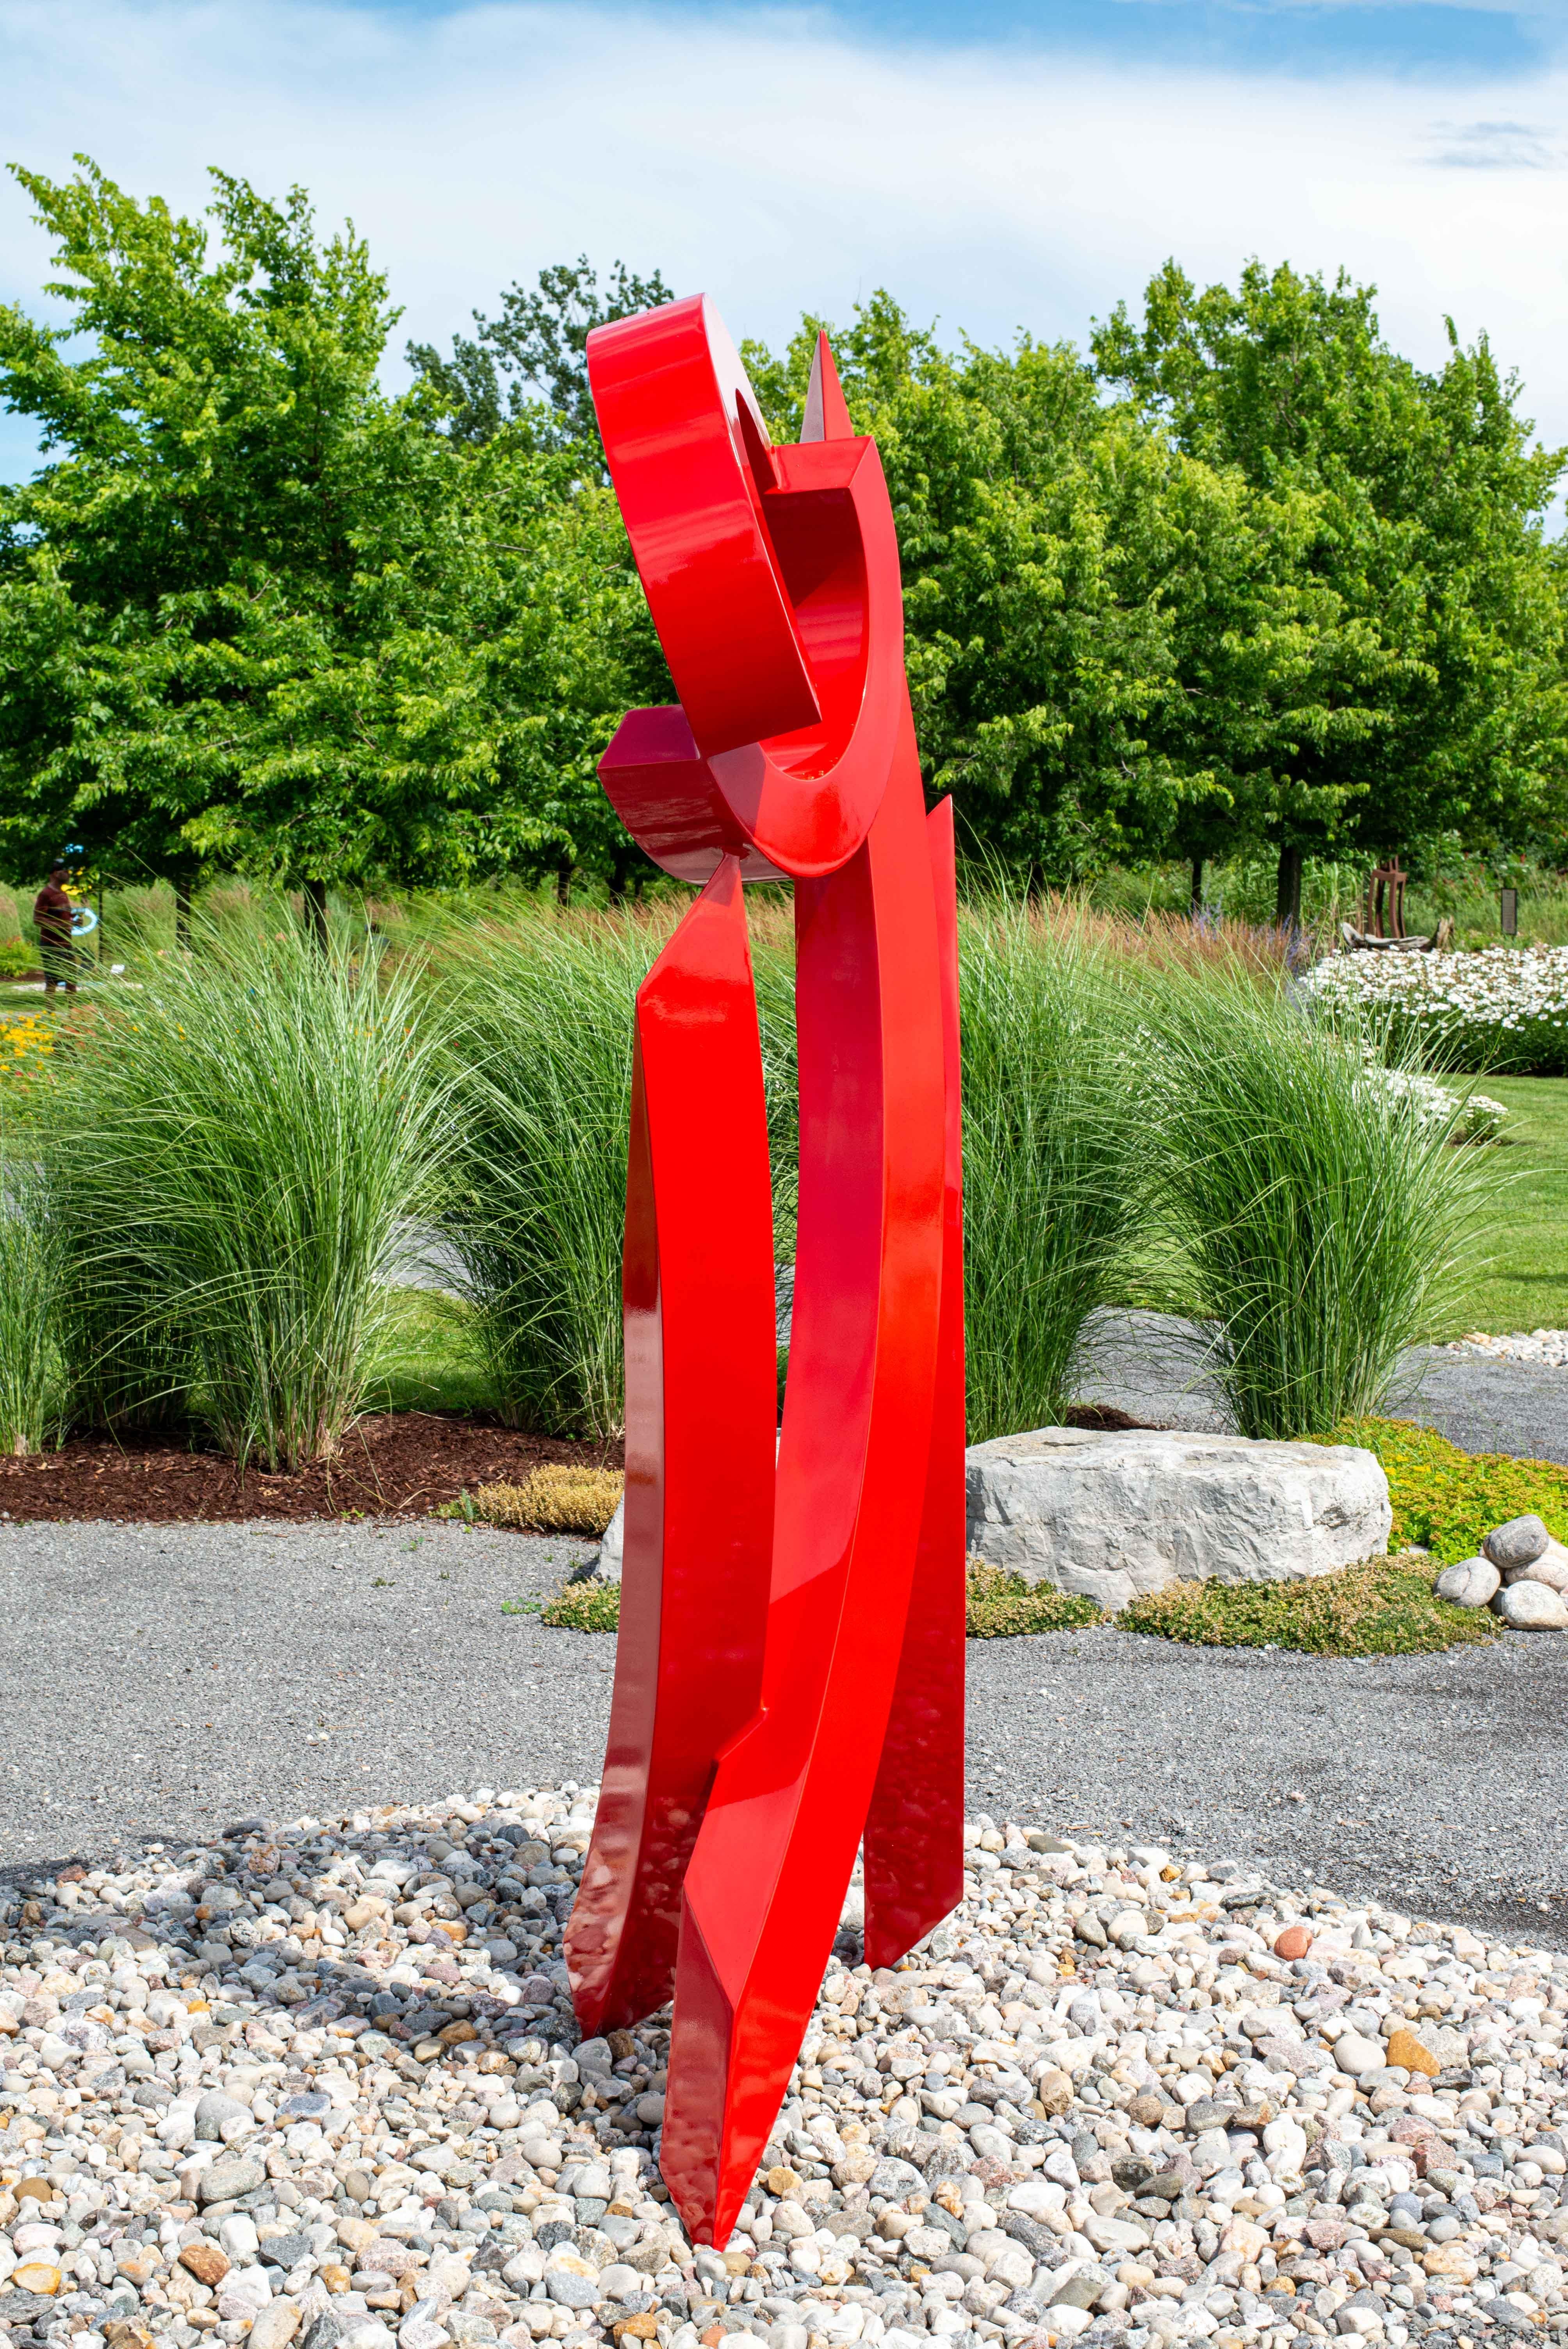 A fine sculptor for 30 years, American artist Rob Lorenson creates dynamic abstract pieces that are visually captivating. This large elegant outdoor sculpture is forged from stainless steel and features three curved columns of varying lengths that